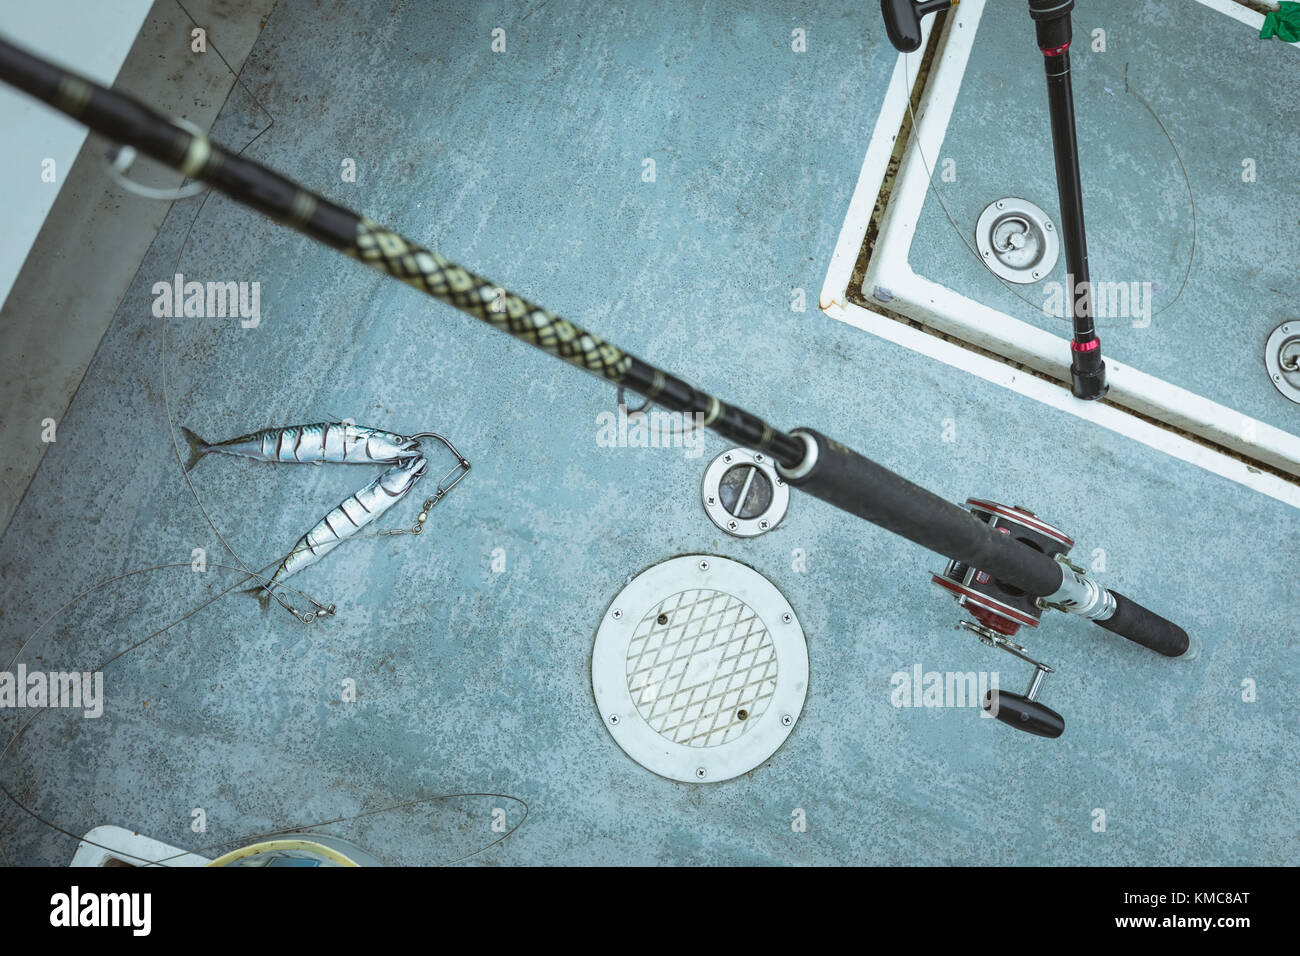 Fillet of fish and fishing rod on boat Stock Photo